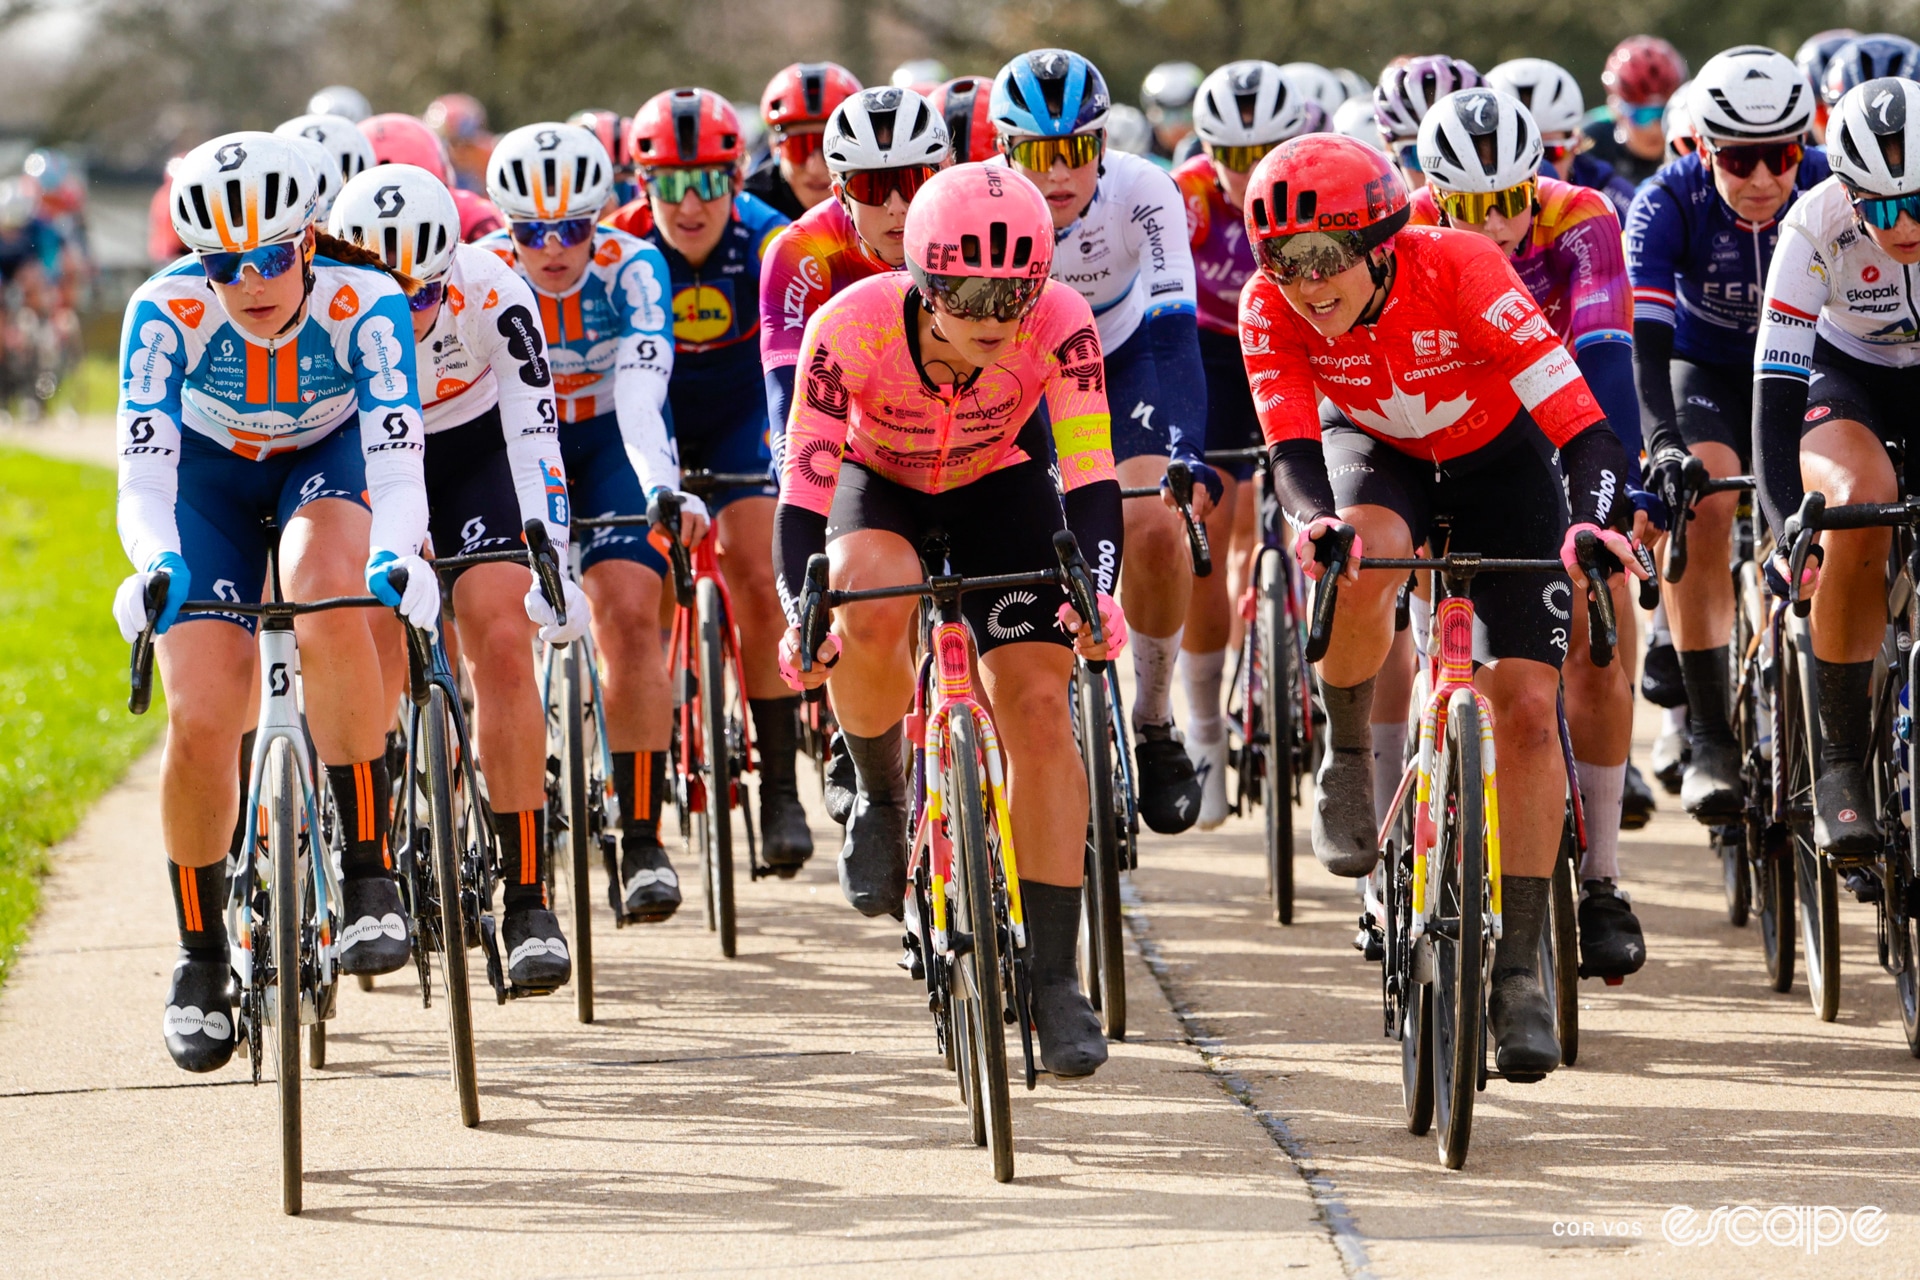 A peloton rides along, with two riders talking at the front.